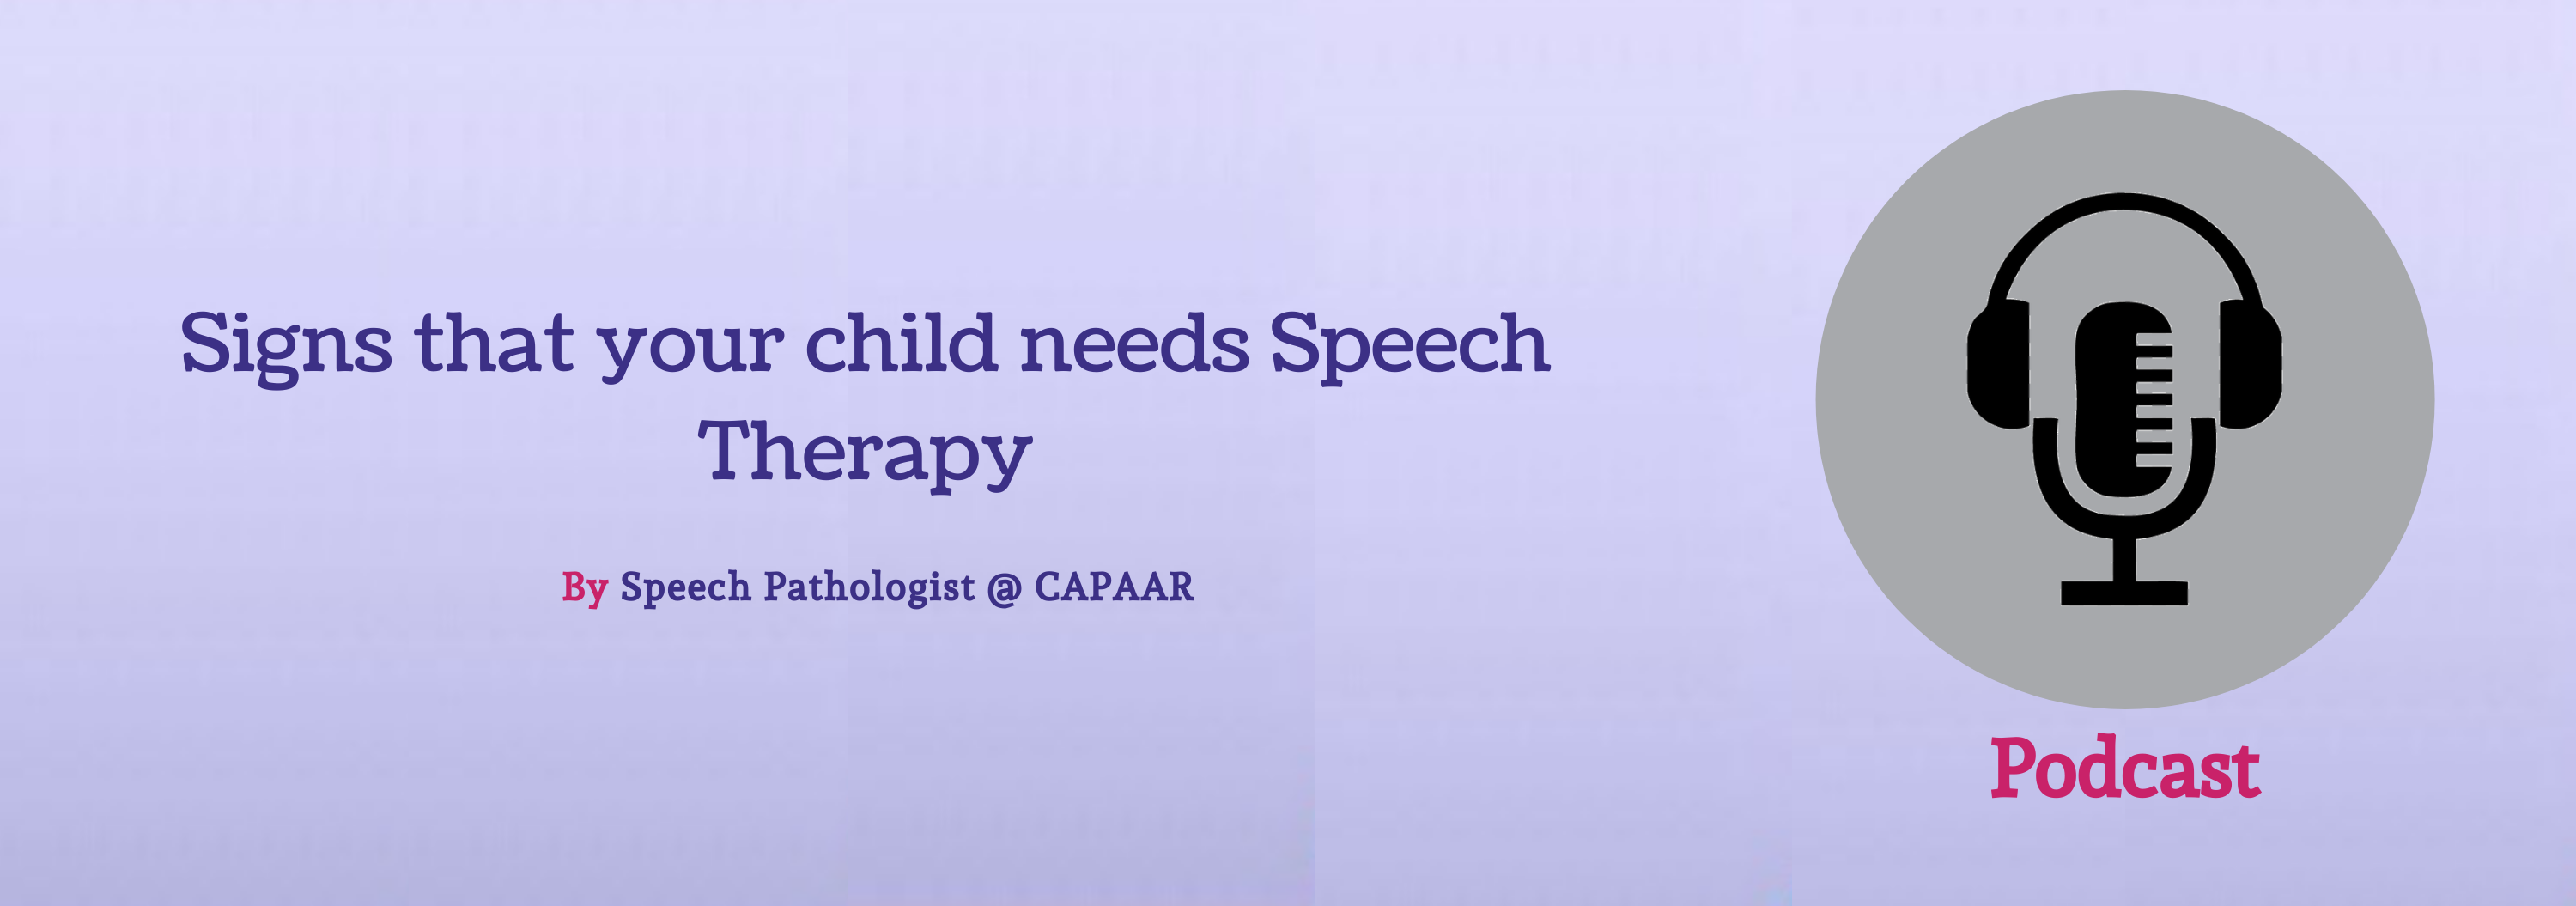 Signs that your child needs speech therapy